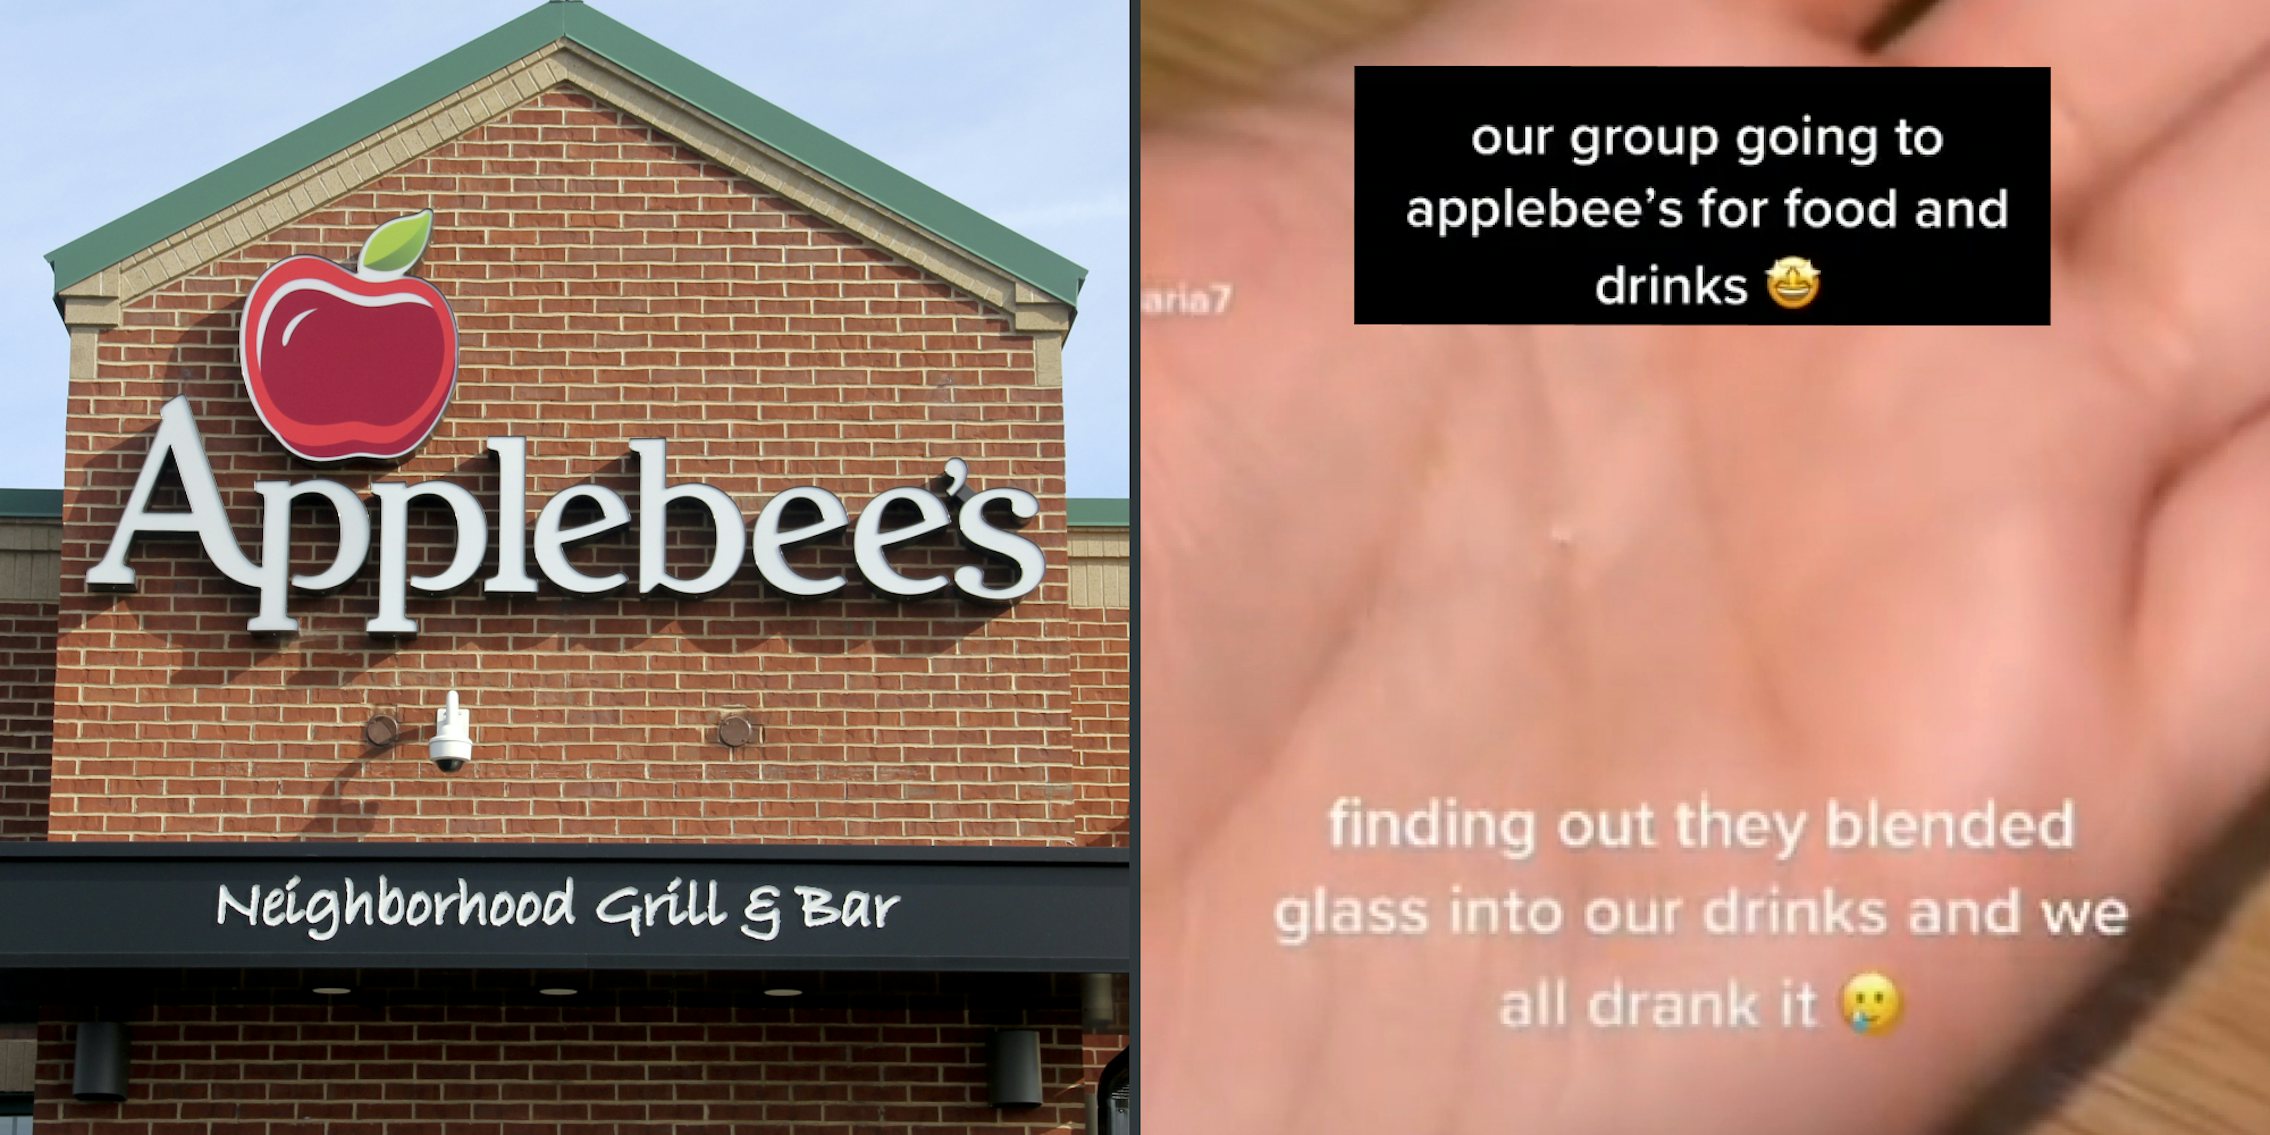 Applebee's neighborhood grill and bar restaurant (l) Hand with small pebble of glass caption ' our group going to applebee's for food and drinks... finding out they blended glass into our drinks and we all drank it' (r)